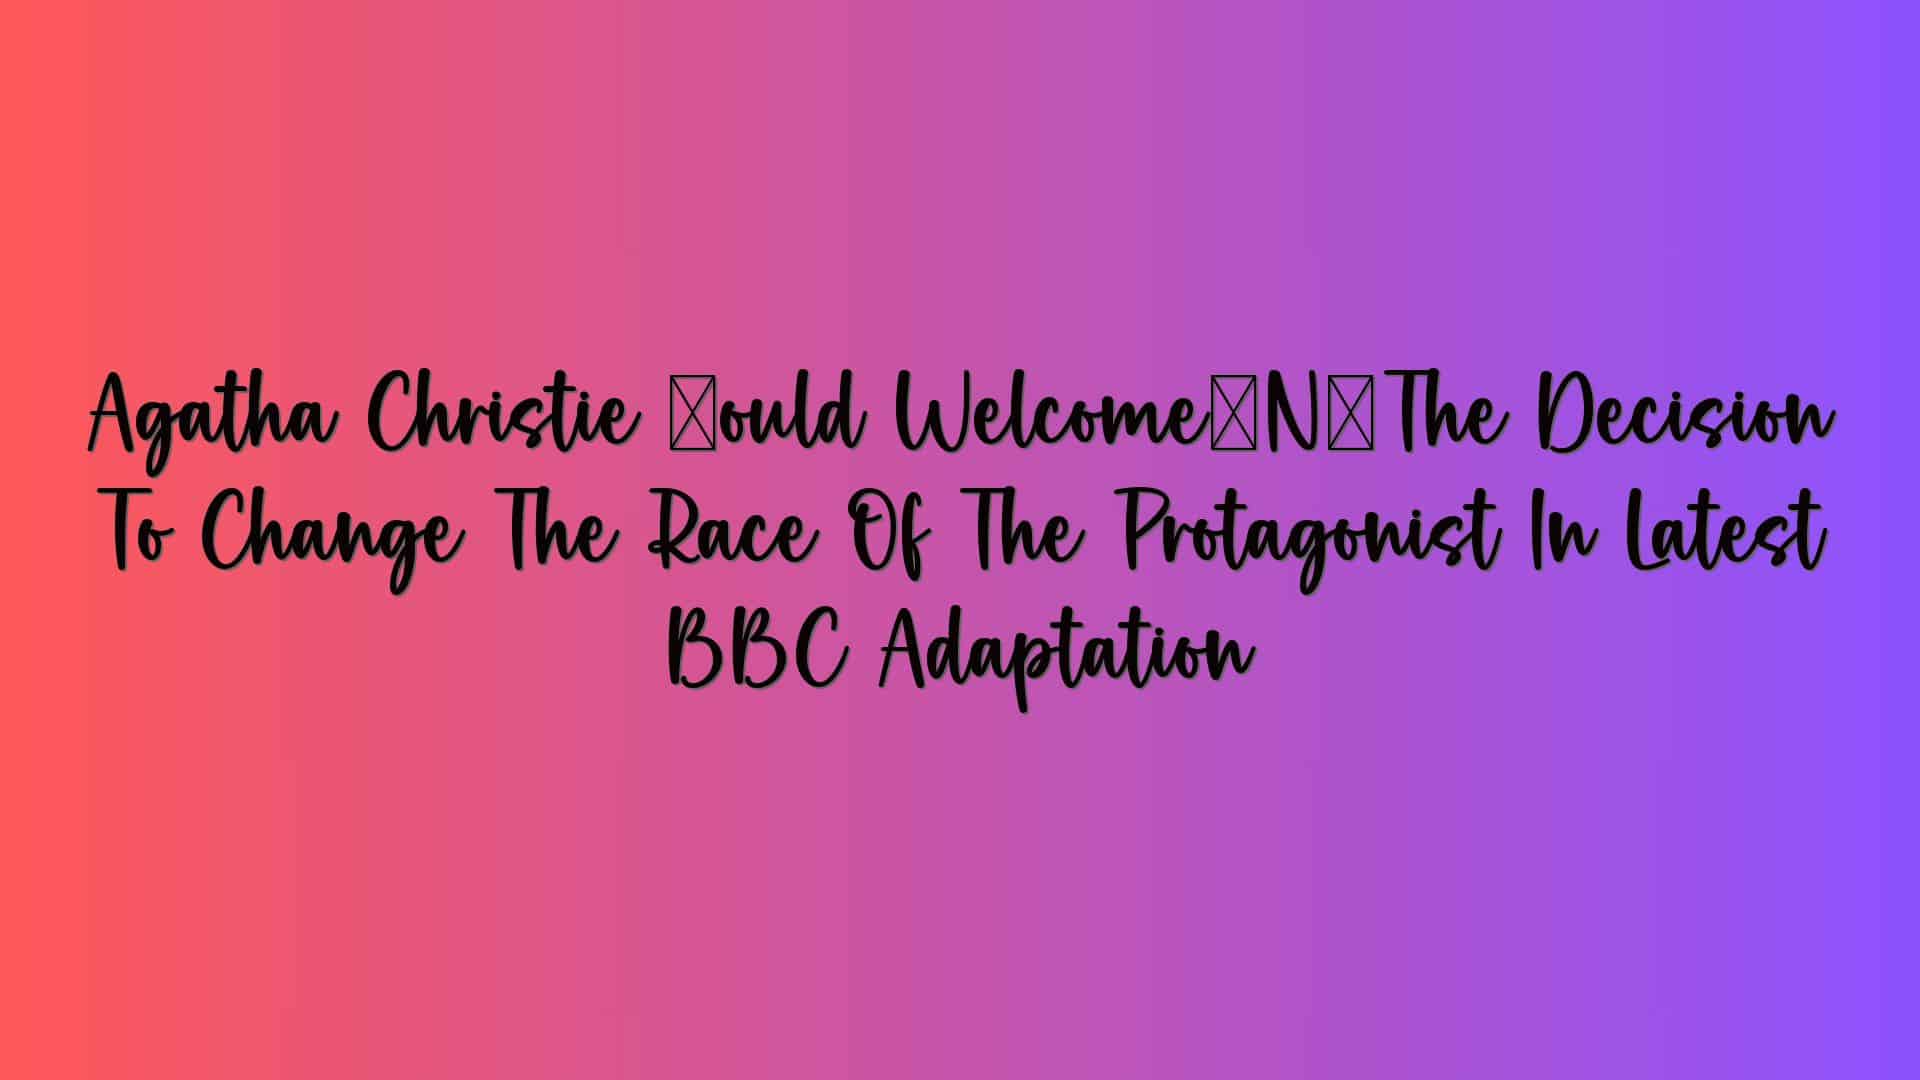 Agatha Christie ‘would Welcome’ The Decision To Change The Race Of The Protagonist In Latest BBC Adaptation